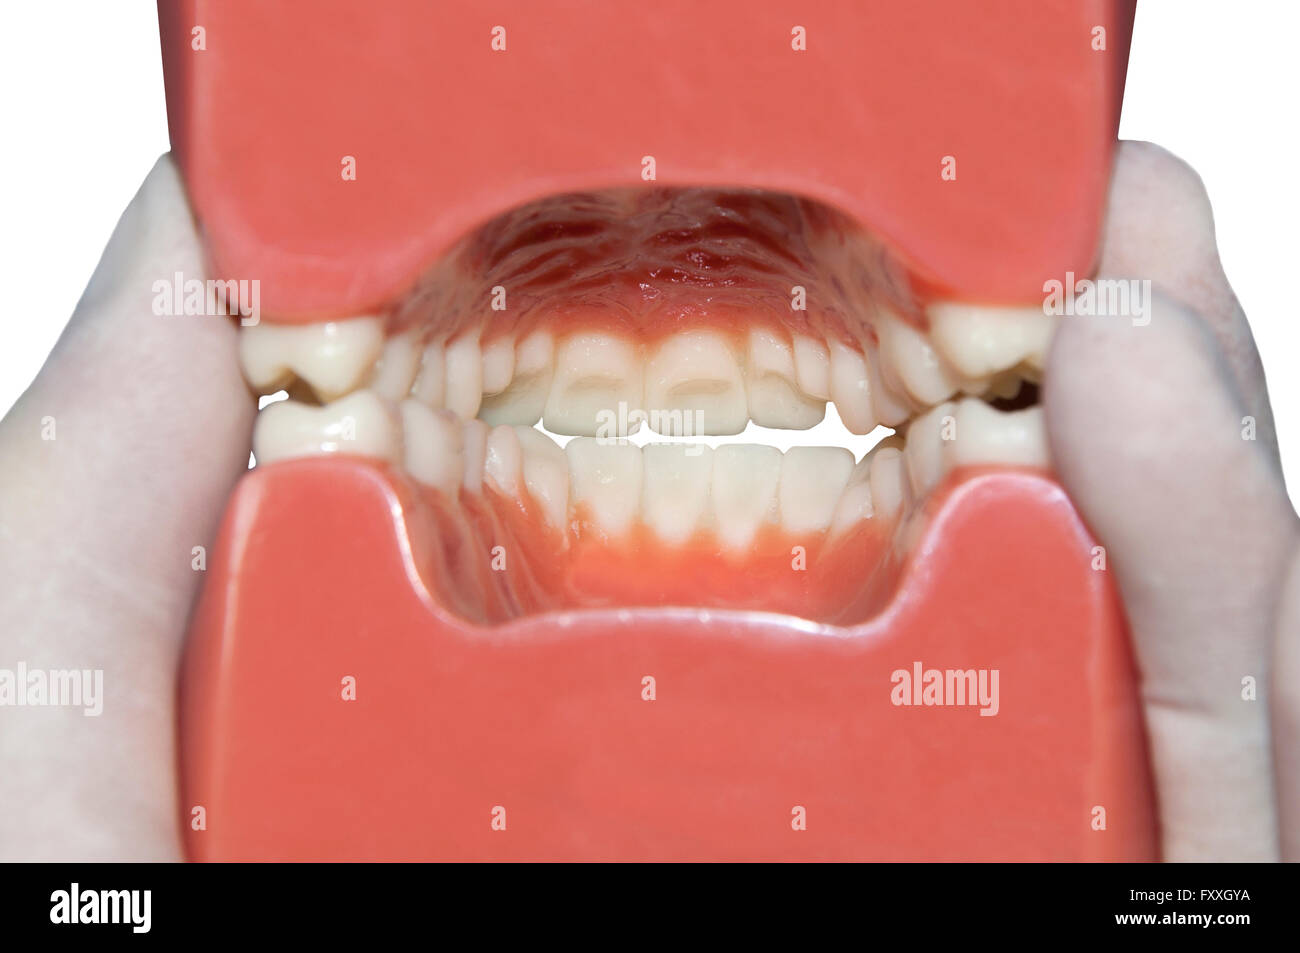 dental care oral hygiene: view of interior mouth Stock Photo